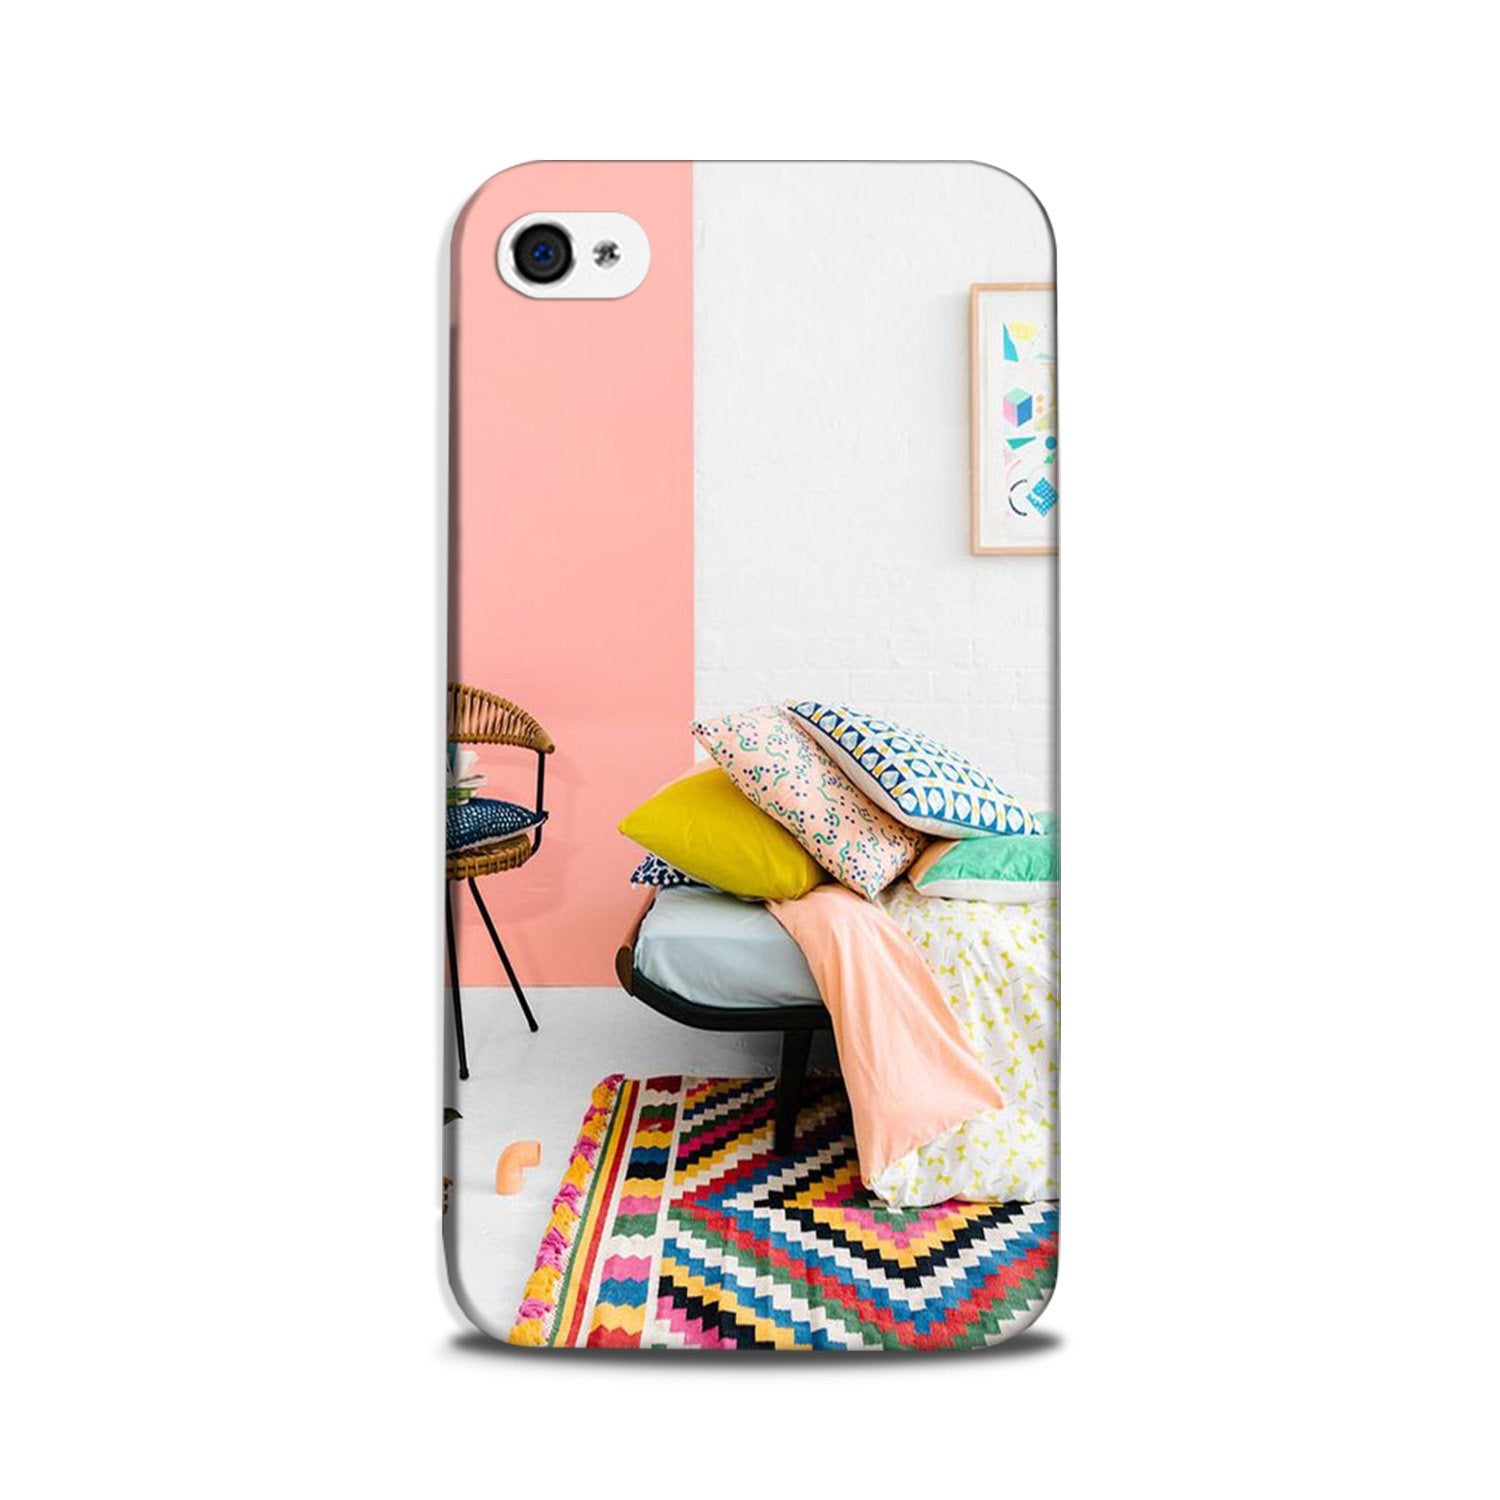 Home Décor Case for iPhone 5/ 5s